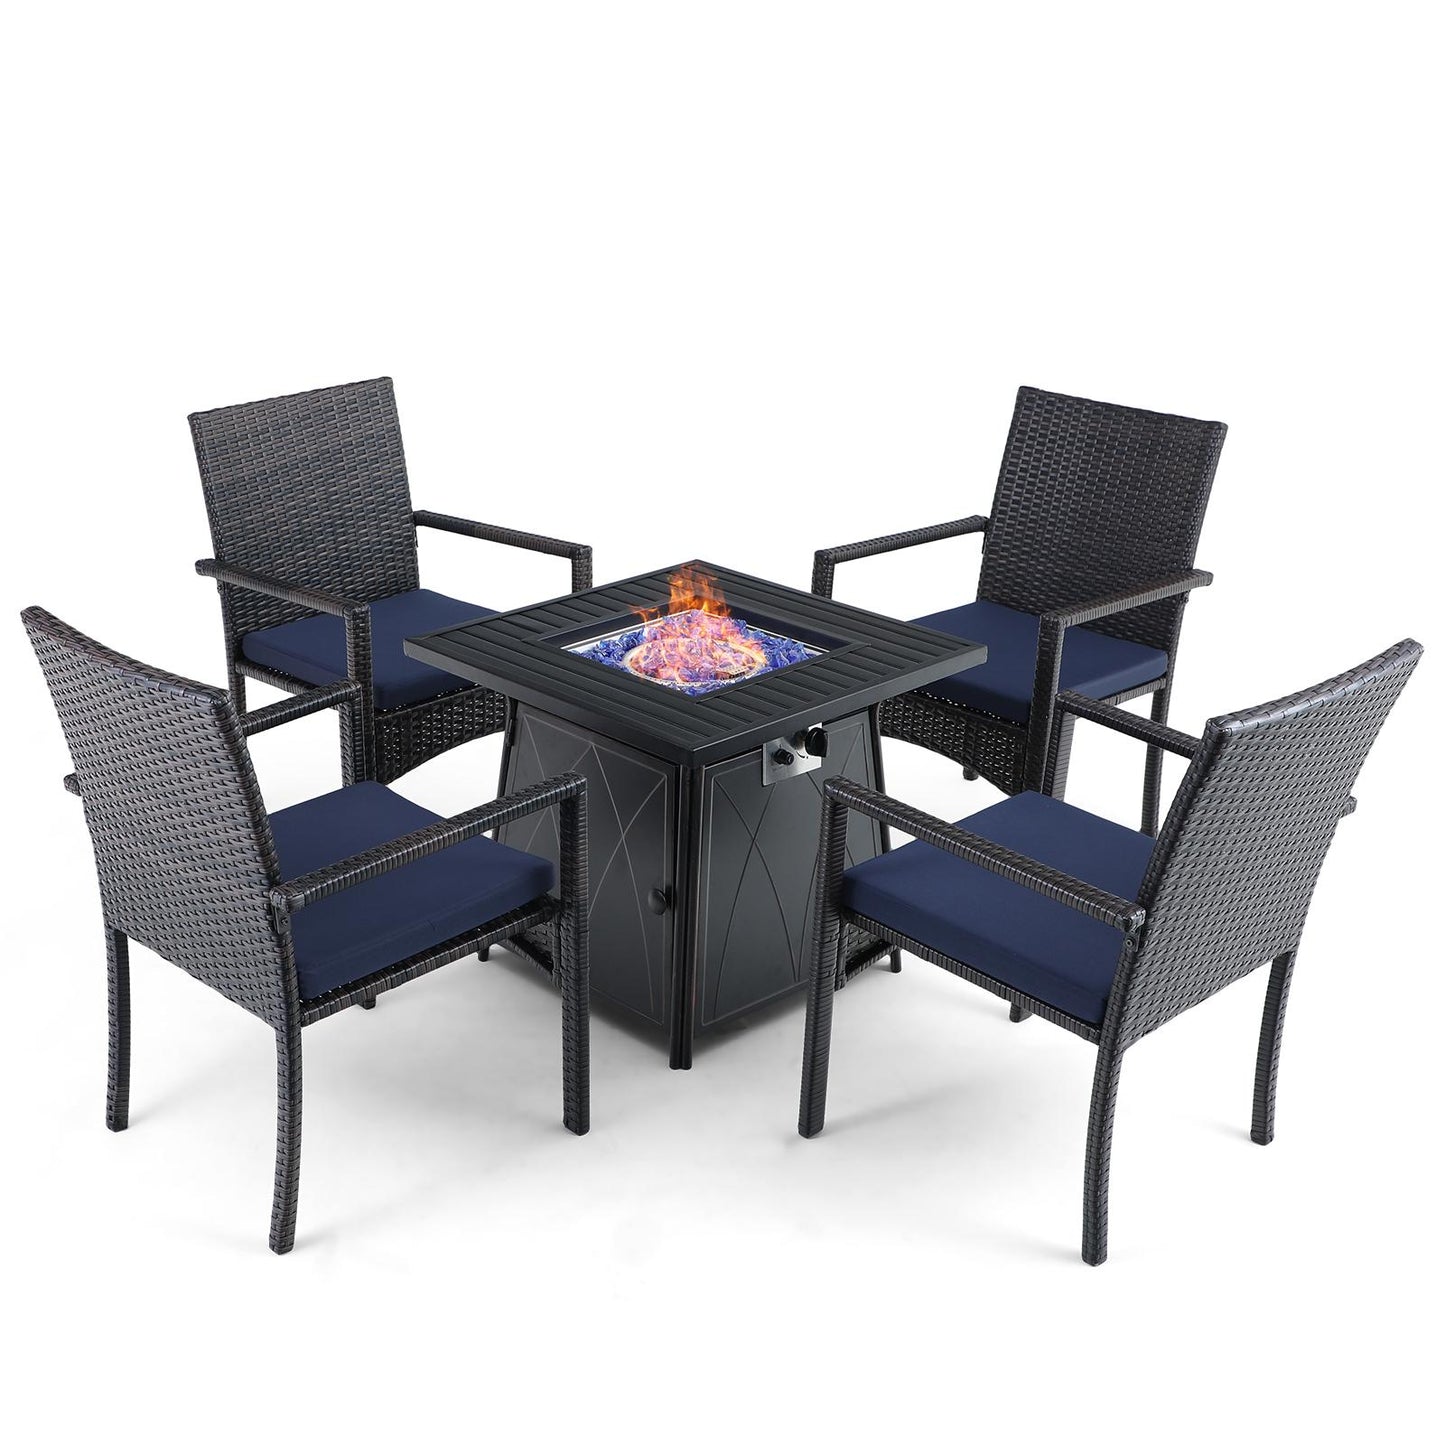 Sophia & William 5 Pcs Wicker Rattan Patio Dining Set with Gas Fire Pit Table - Blue